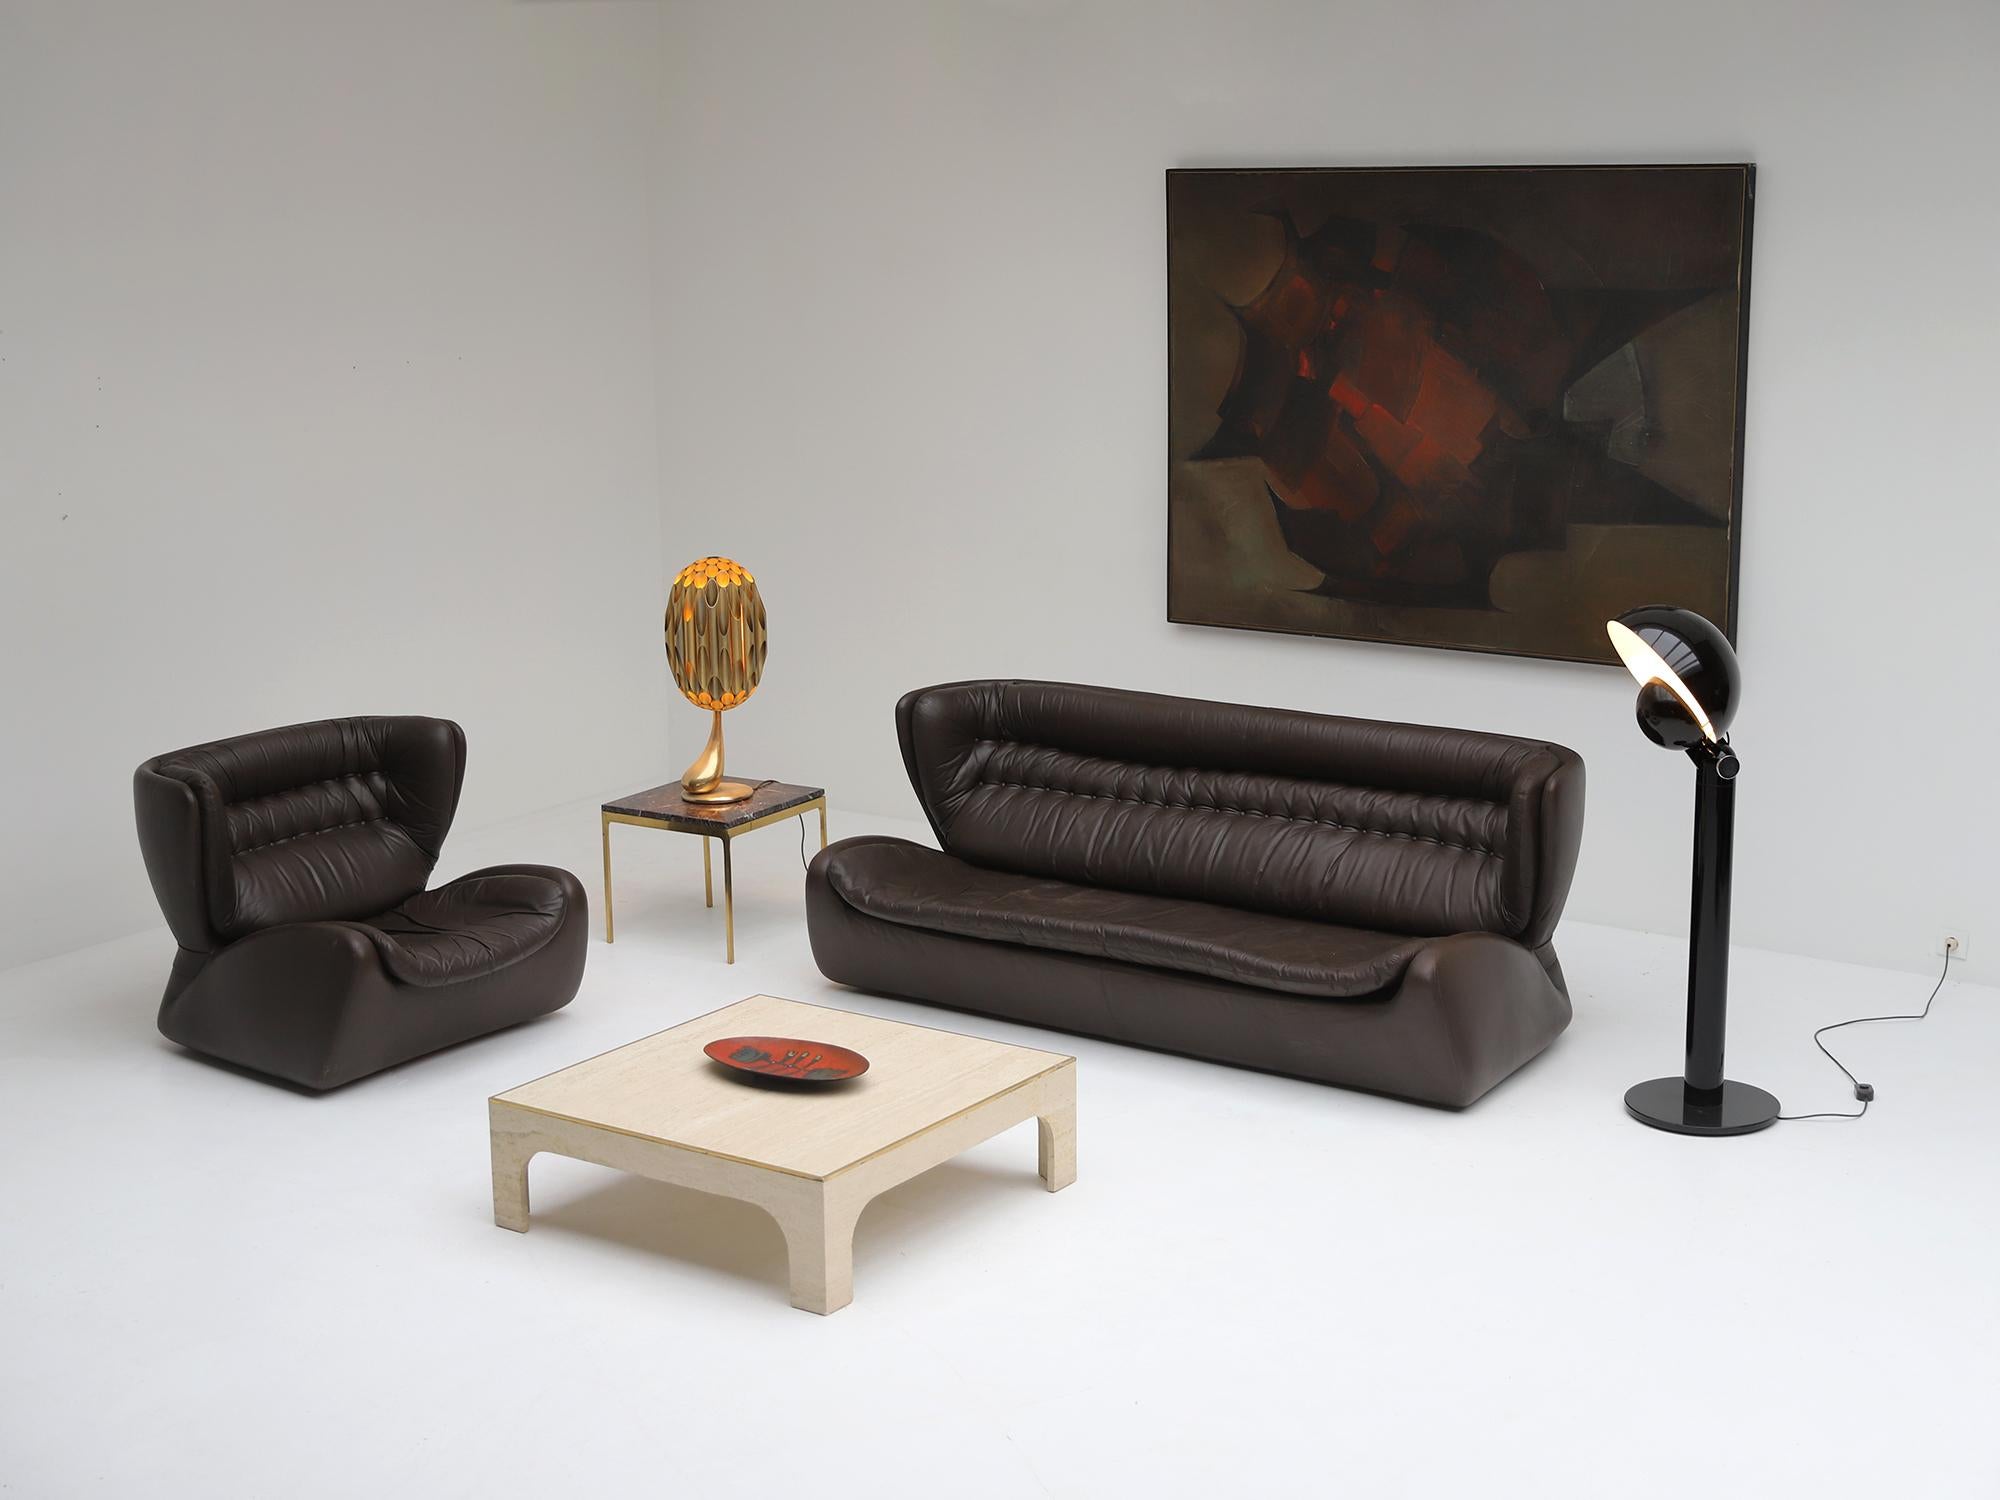 Space Age Modern Chocolate Brown Leather Sofa 'Pasha' by Durlet, Belgium, 1970s For Sale 3